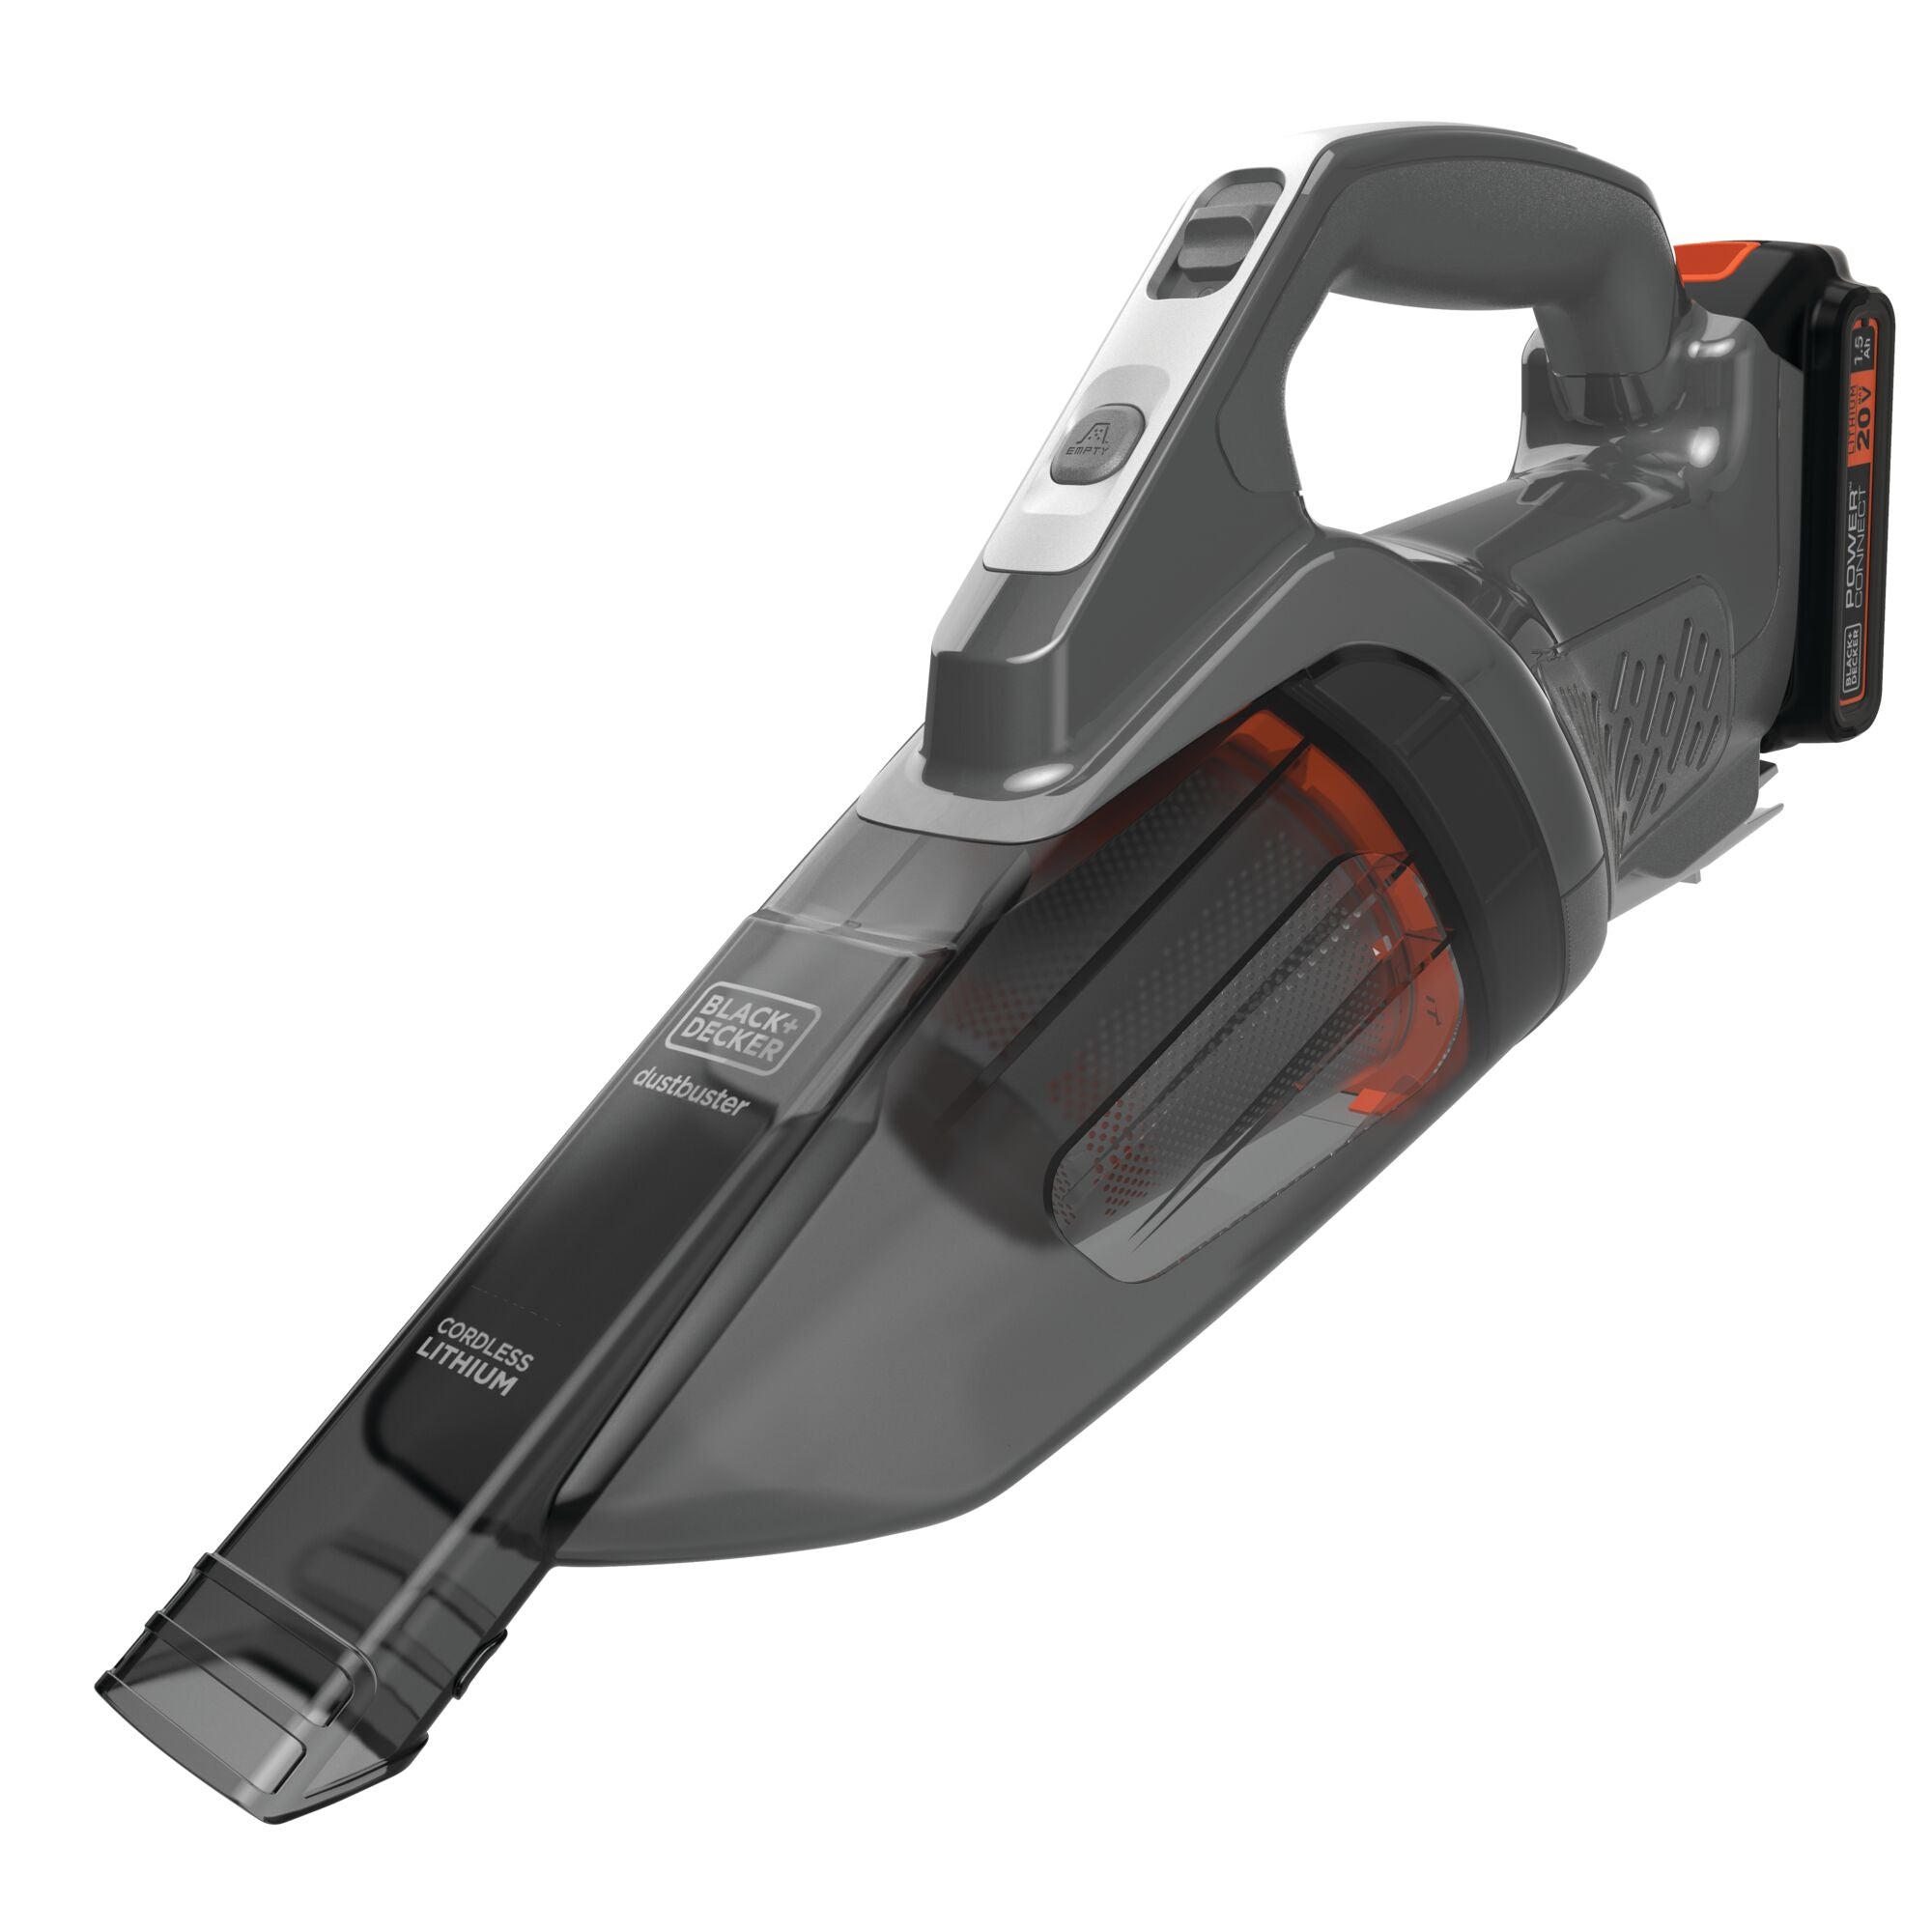 BLACK+DECKER dustbuster® POWERCONNECT™ 20V MAX* Cordless Handheld Vacuum cleaning the wooden shelf.